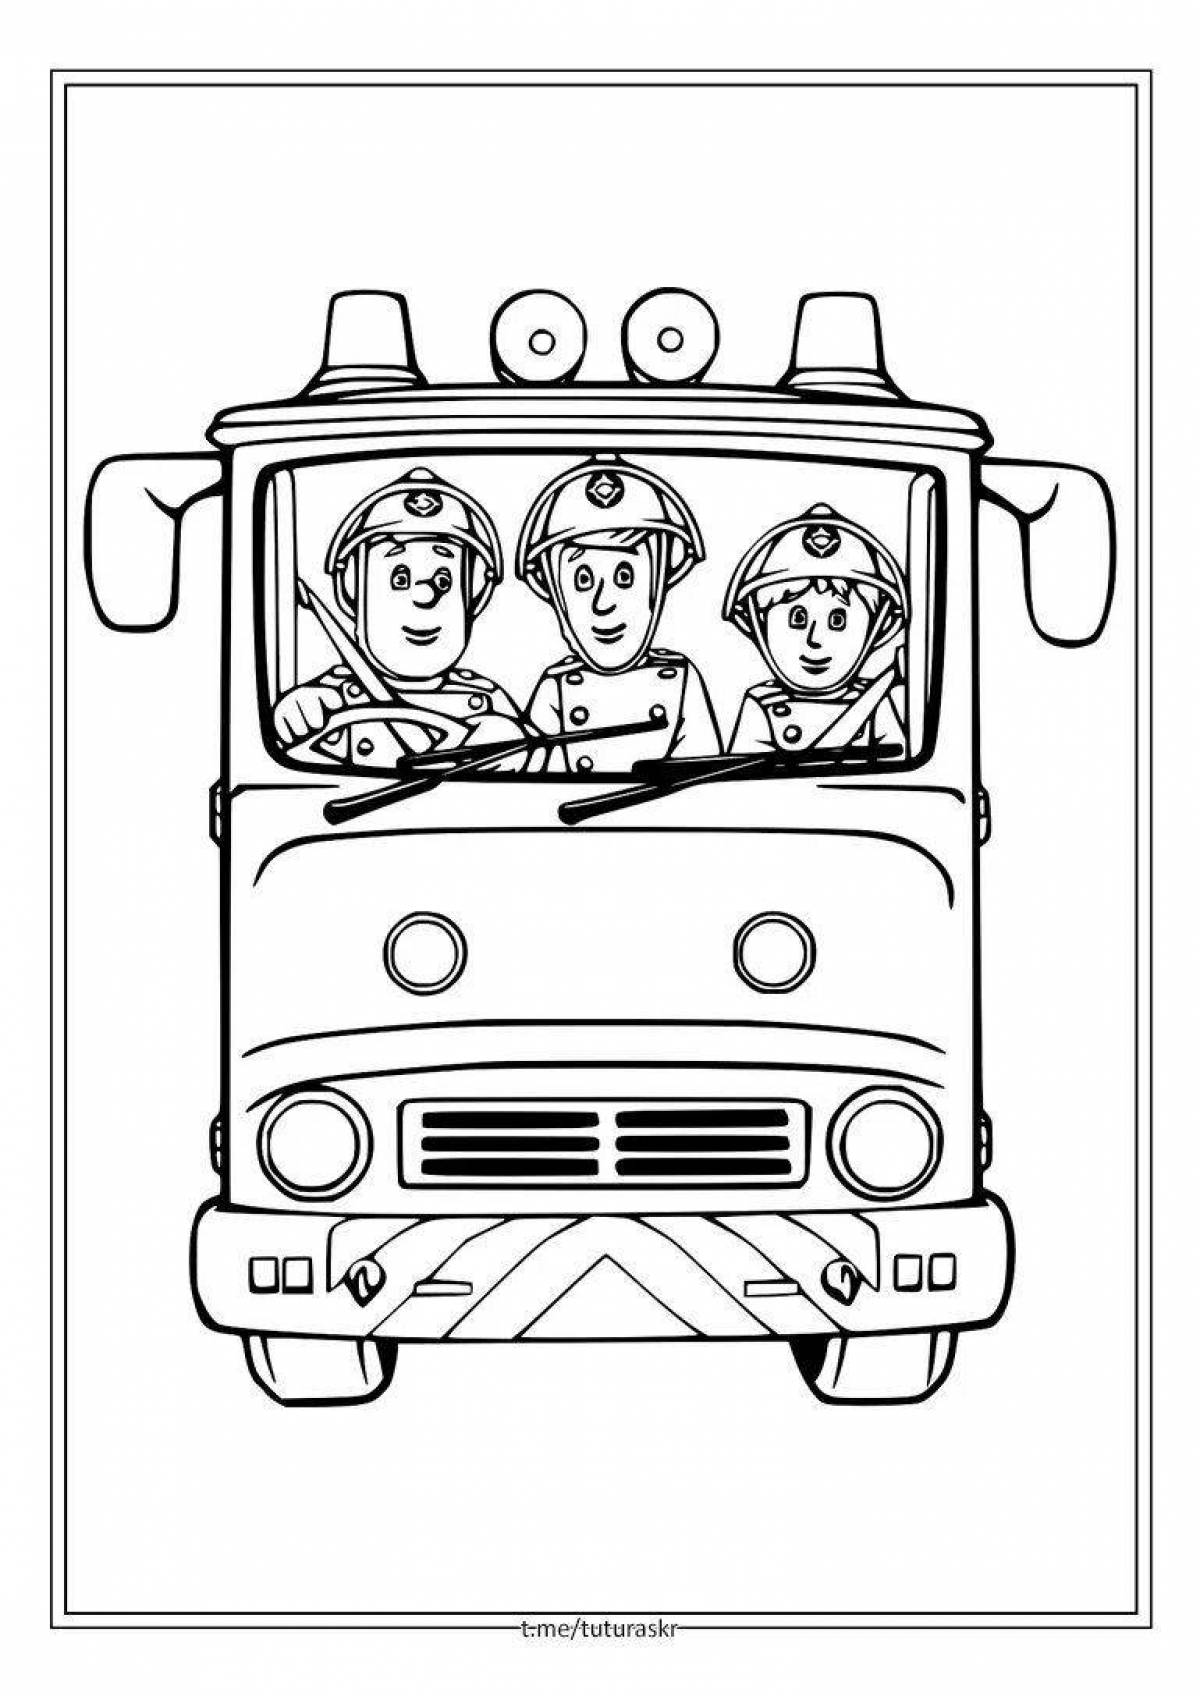 Sweet finley fire truck coloring page